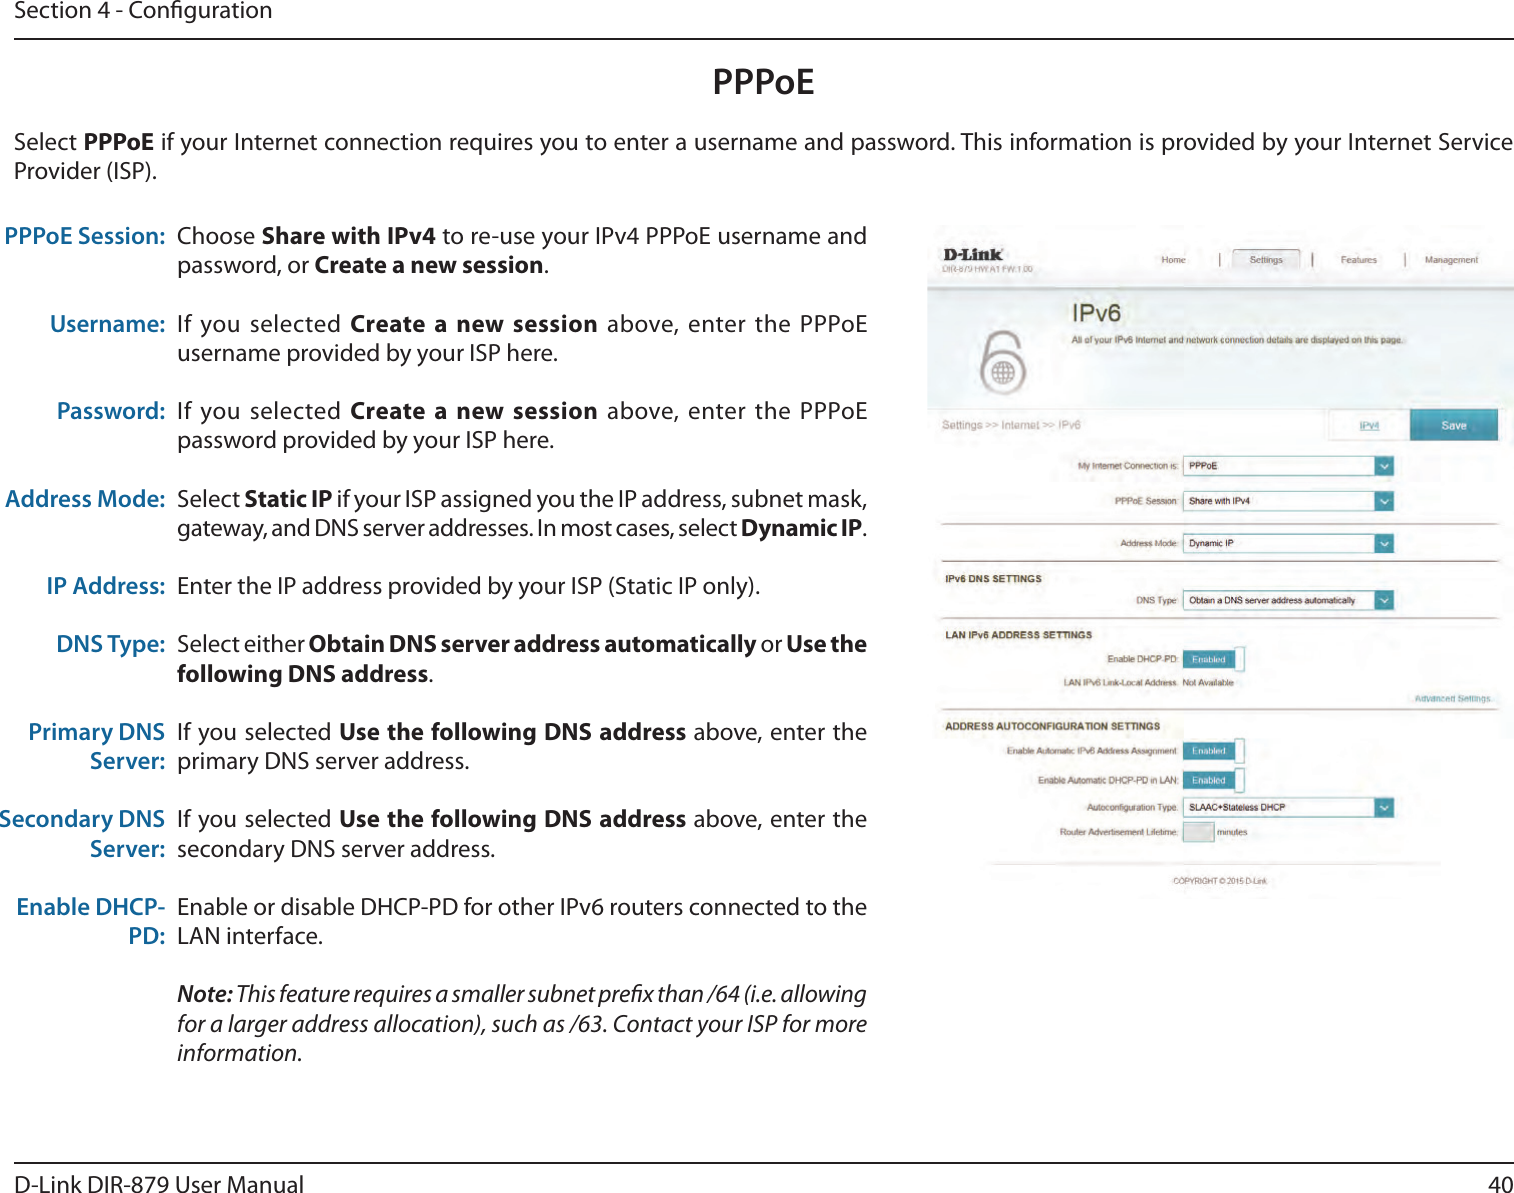 40D-Link DIR-879 User ManualSection 4 - CongurationPPPoEChoose Share with IPv4 to re-use your IPv4 PPPoE username and password, or Create a new session.If you selected Create a new session above, enter the PPPoE username provided by your ISP here.If you selected Create a new session above, enter the PPPoE password provided by your ISP here.Select Static IP if your ISP assigned you the IP address, subnet mask, gateway, and DNS server addresses. In most cases, select Dynamic IP.Enter the IP address provided by your ISP (Static IP only).Select either Obtain DNS server address automatically or Use the following DNS address.If you selected Use the following DNS address above, enter the primary DNS server address. If you selected Use the following DNS address above, enter the secondary DNS server address.Enable or disable DHCP-PD for other IPv6 routers connected to the LAN interface.Note: This feature requires a smaller subnet prex than /64 (i.e. allowing for a larger address allocation), such as /63. Contact your ISP for more information.PPPoE Session:Username:Password:Address Mode:IP Address:DNS Type:Primary DNS Server:Secondary DNS Server:Enable DHCP-PD:Select PPPoE if your Internet connection requires you to enter a username and password. This information is provided by your Internet Service Provider (ISP).